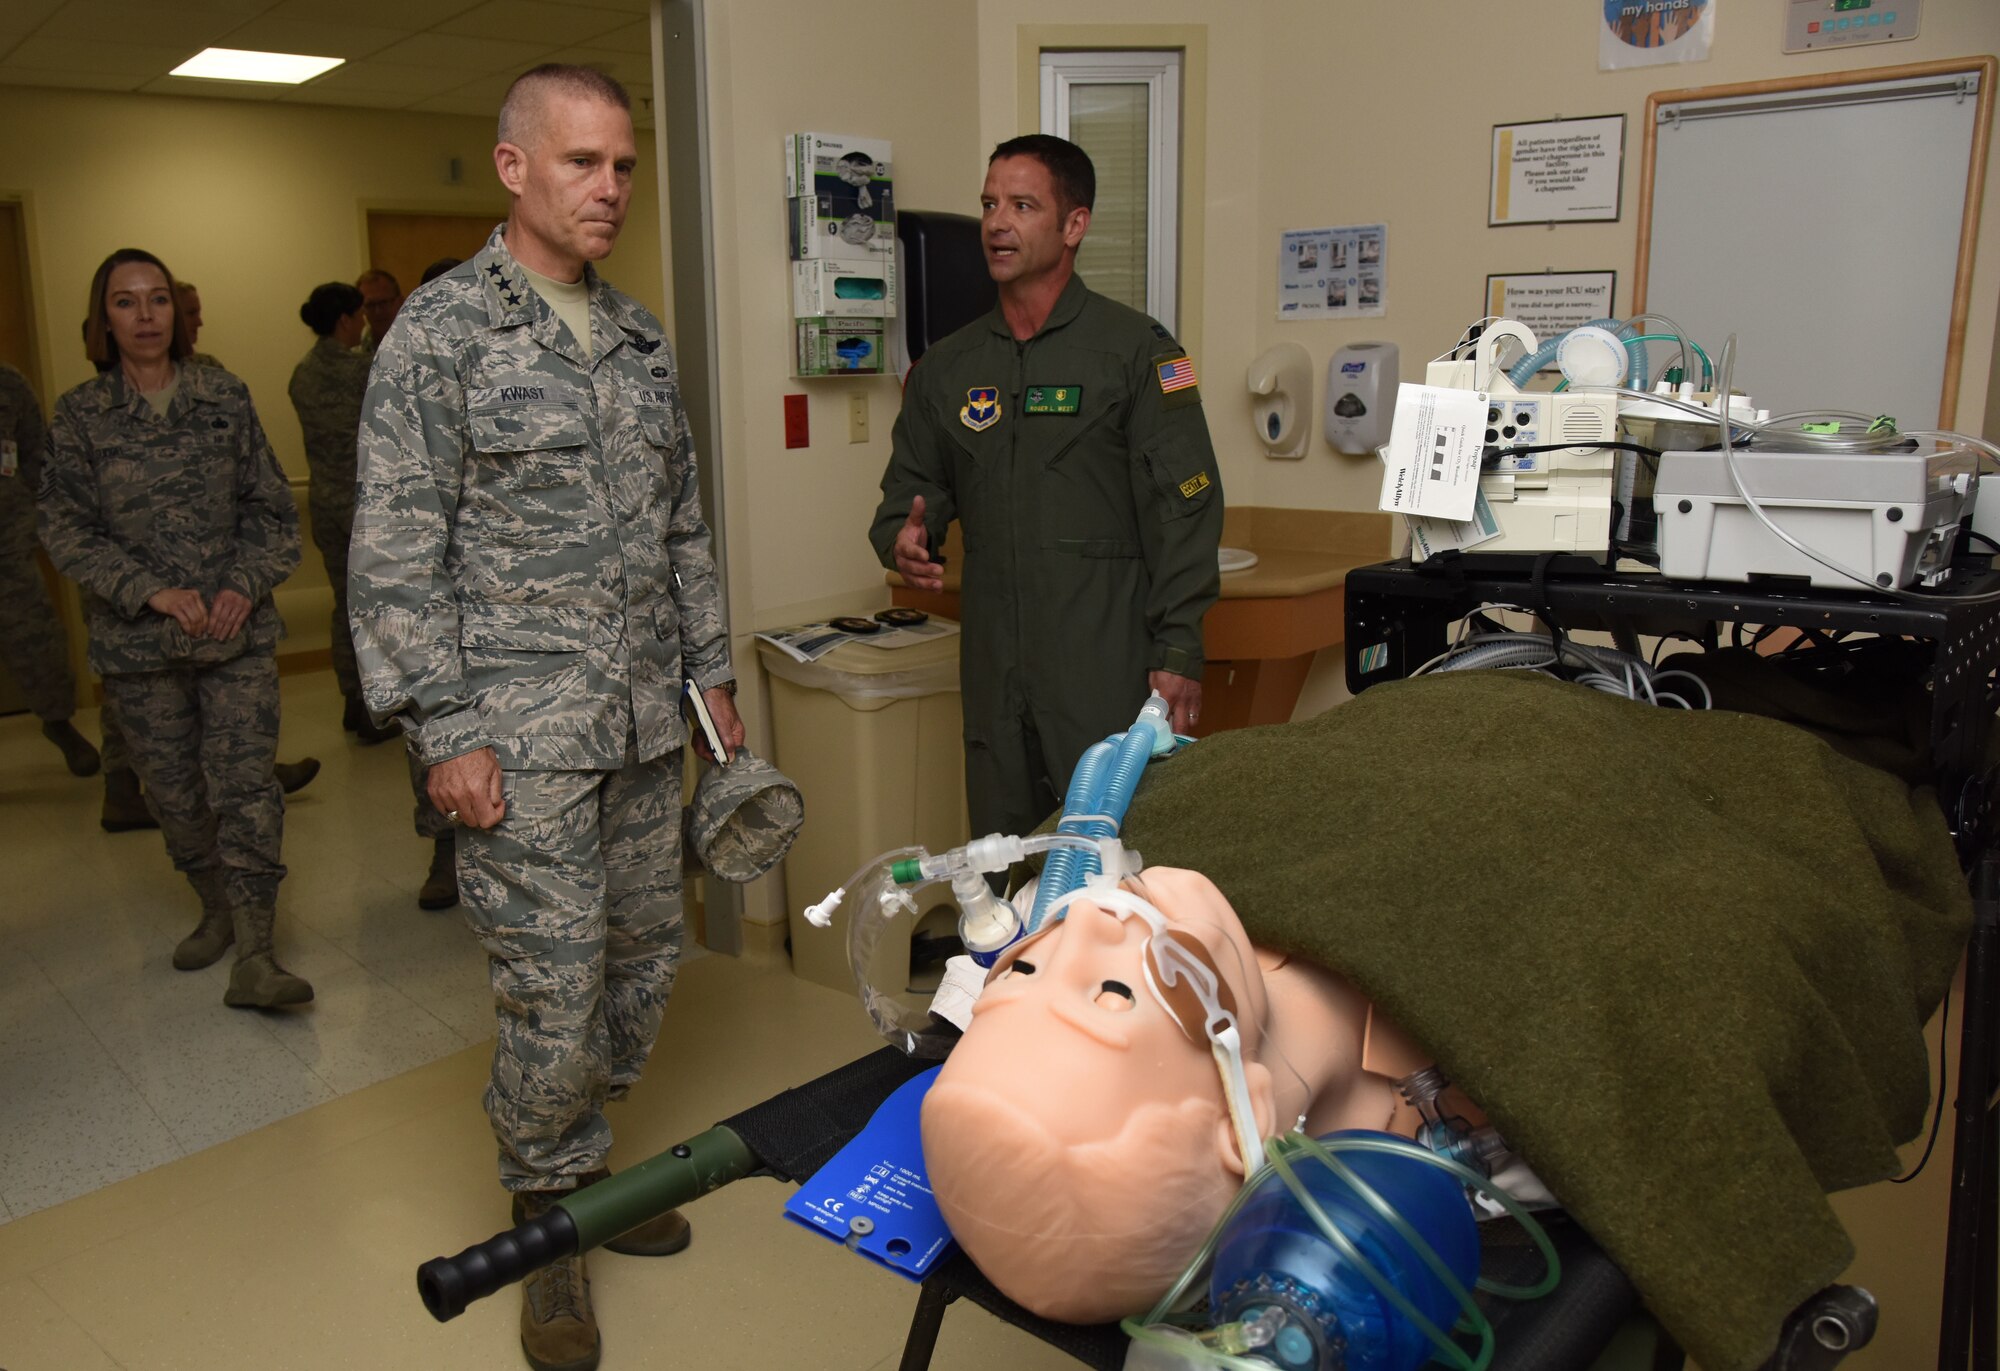 U.S. Air Force Capt. Roger West, 81st Inpatient Operation Squadron intensive care unit element leader, briefs Lt. Gen. Steven Kwast, Air Education and Training Command commander, on ICU care at the Keesler Medical Center during an immersion tour at Keesler Air Force Base, Mississippi, July 16, 2018. Kwast also received an 81st Training Group briefing and a tour of the Levitow Training Support Facility to become more familiar with Keesler’s mission. (U.S. Air Force photo by Kemberly Groue)